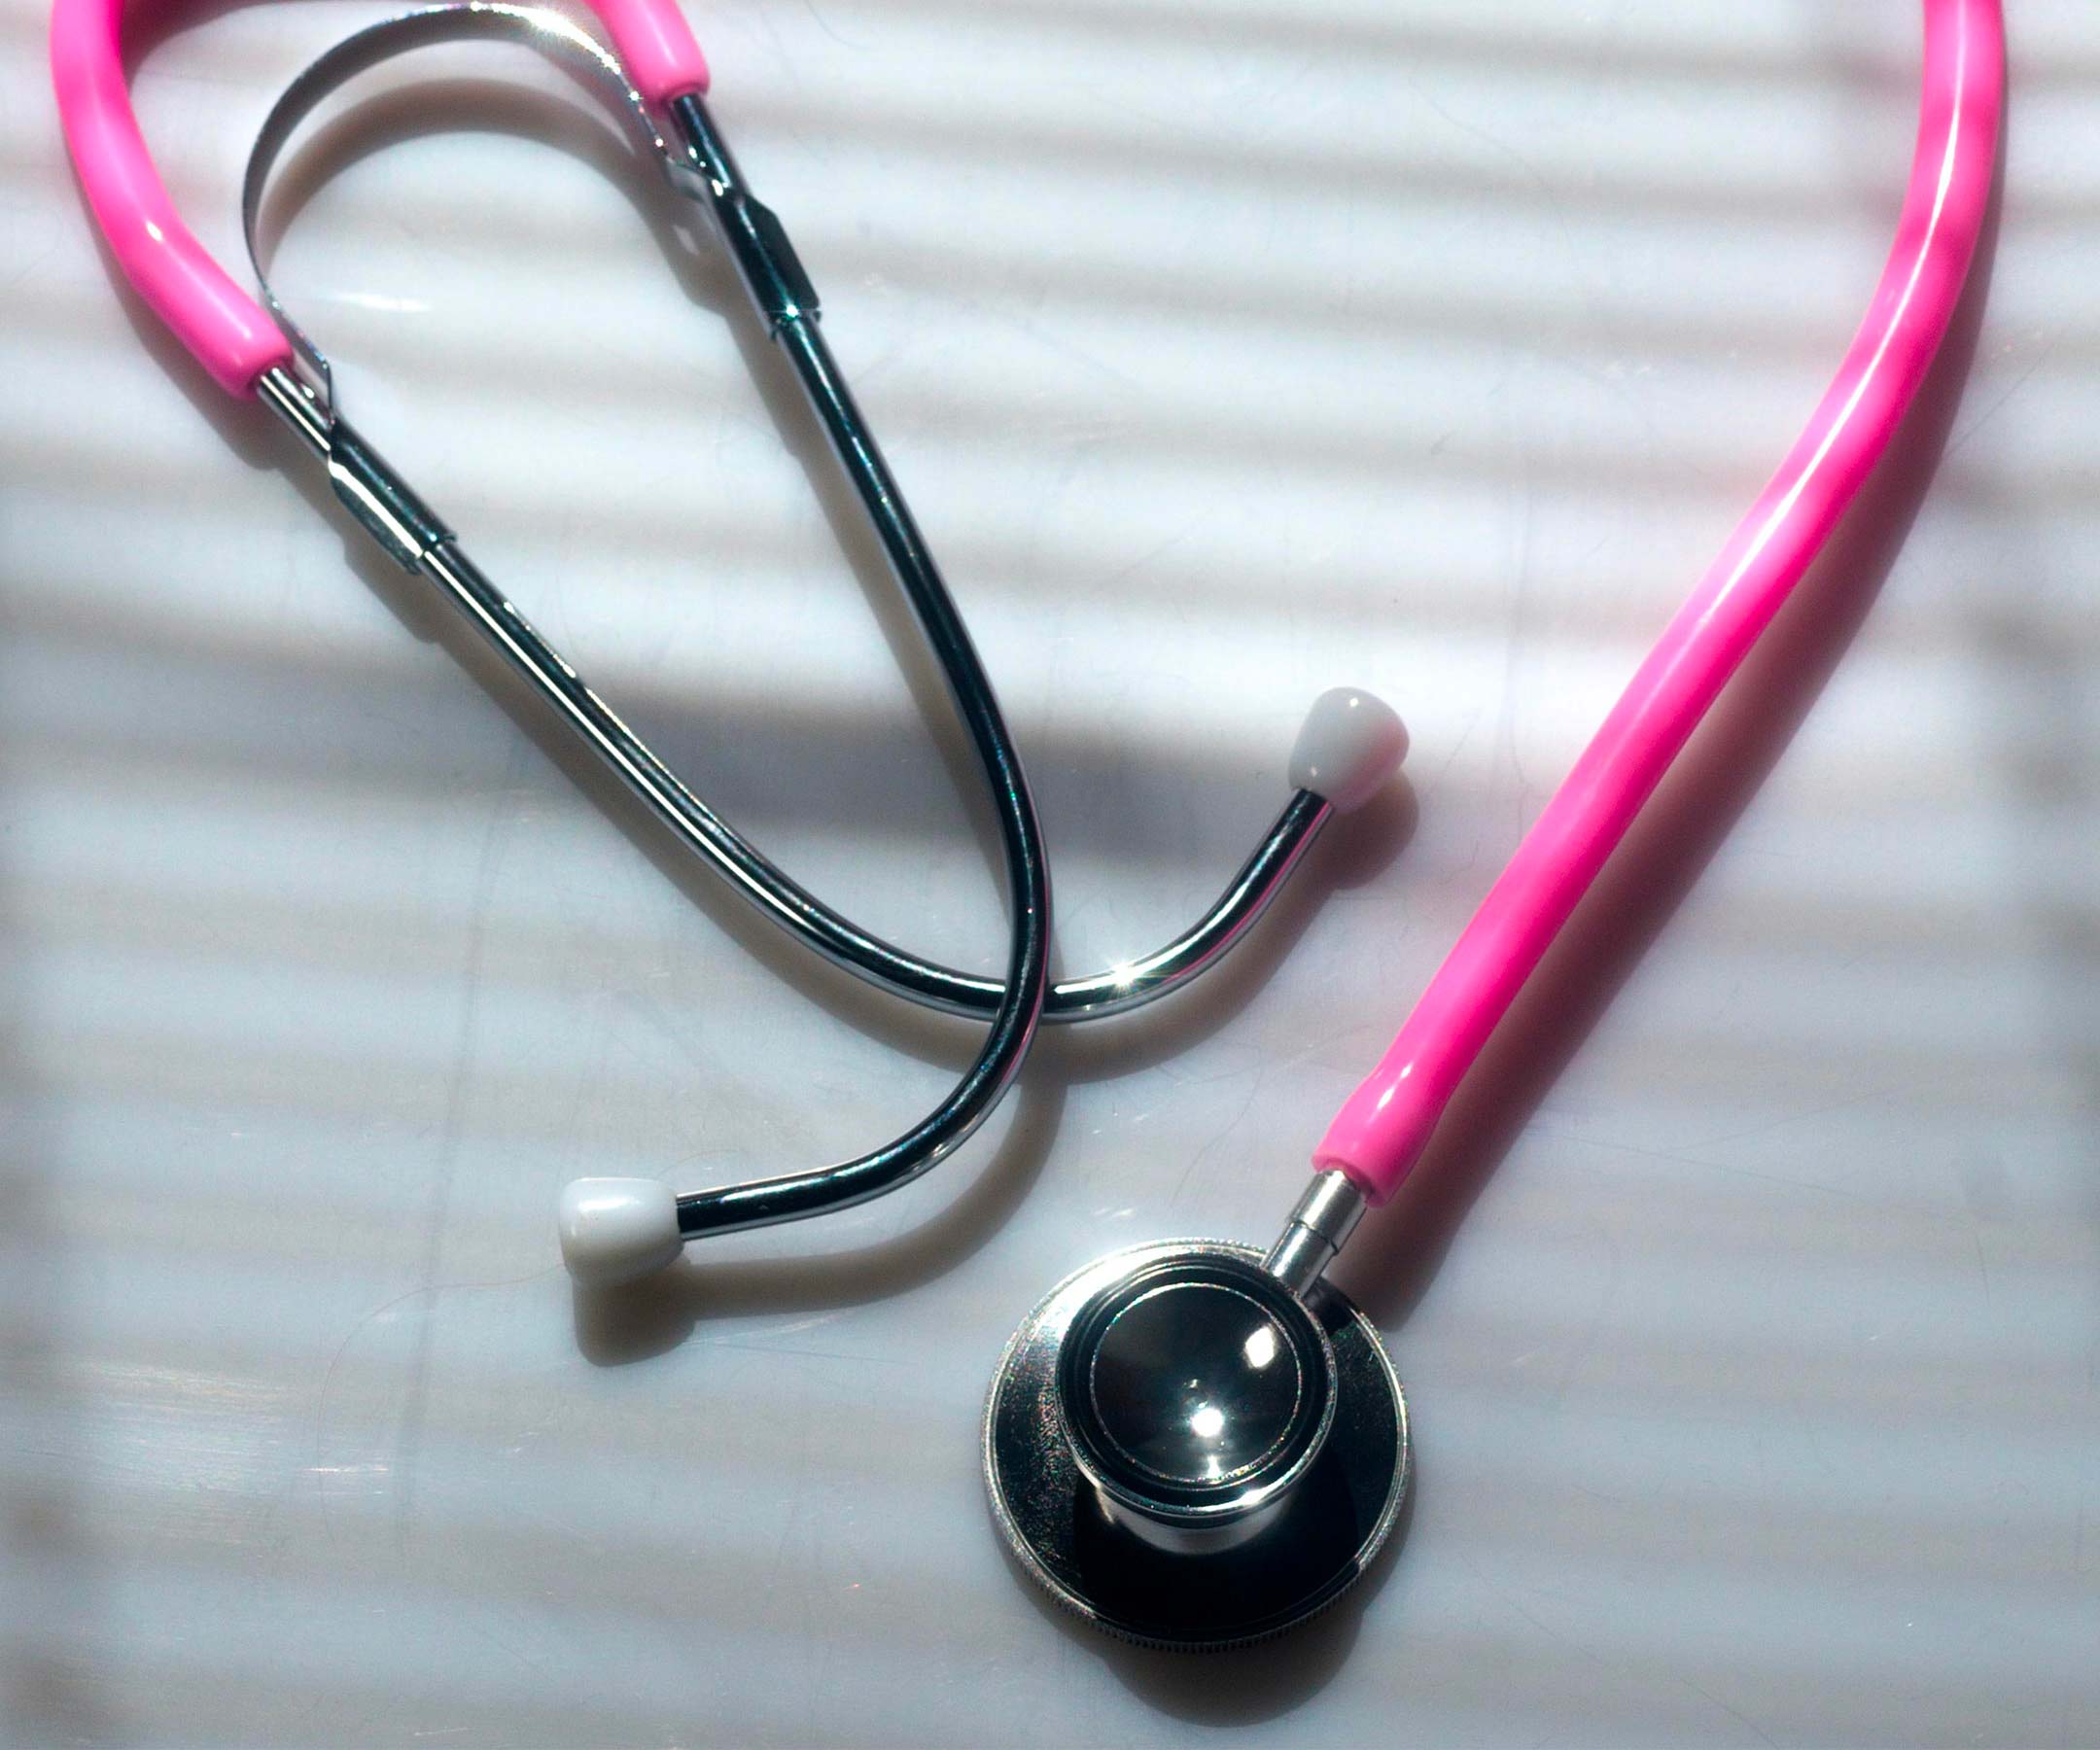 a pink stethoscope on a white surface